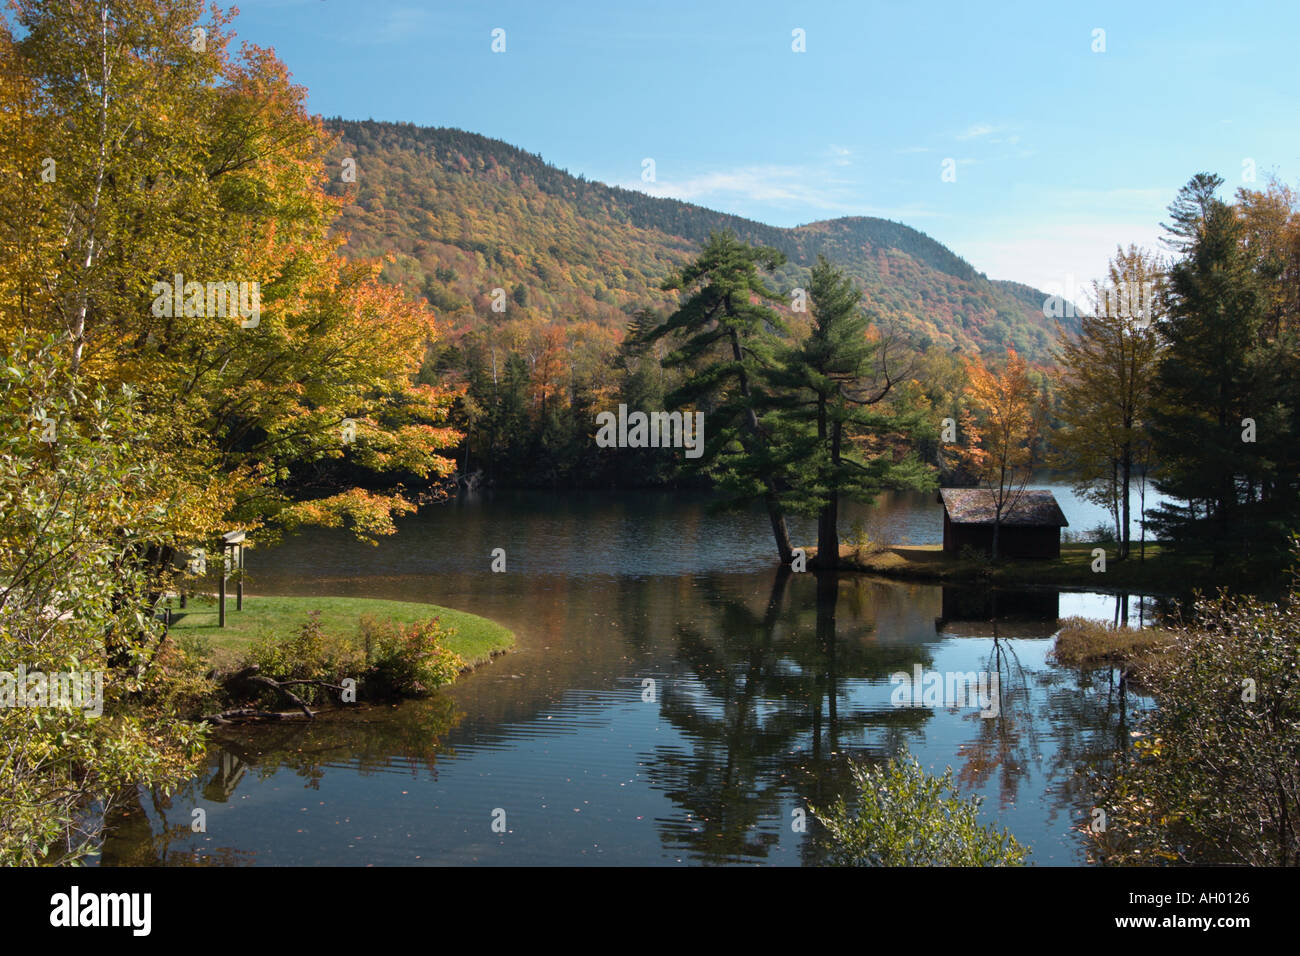 Log cabin on a quiet lake with fall foliage, off Highway 100, Green Mountains, Vermont, USA Stock Photo